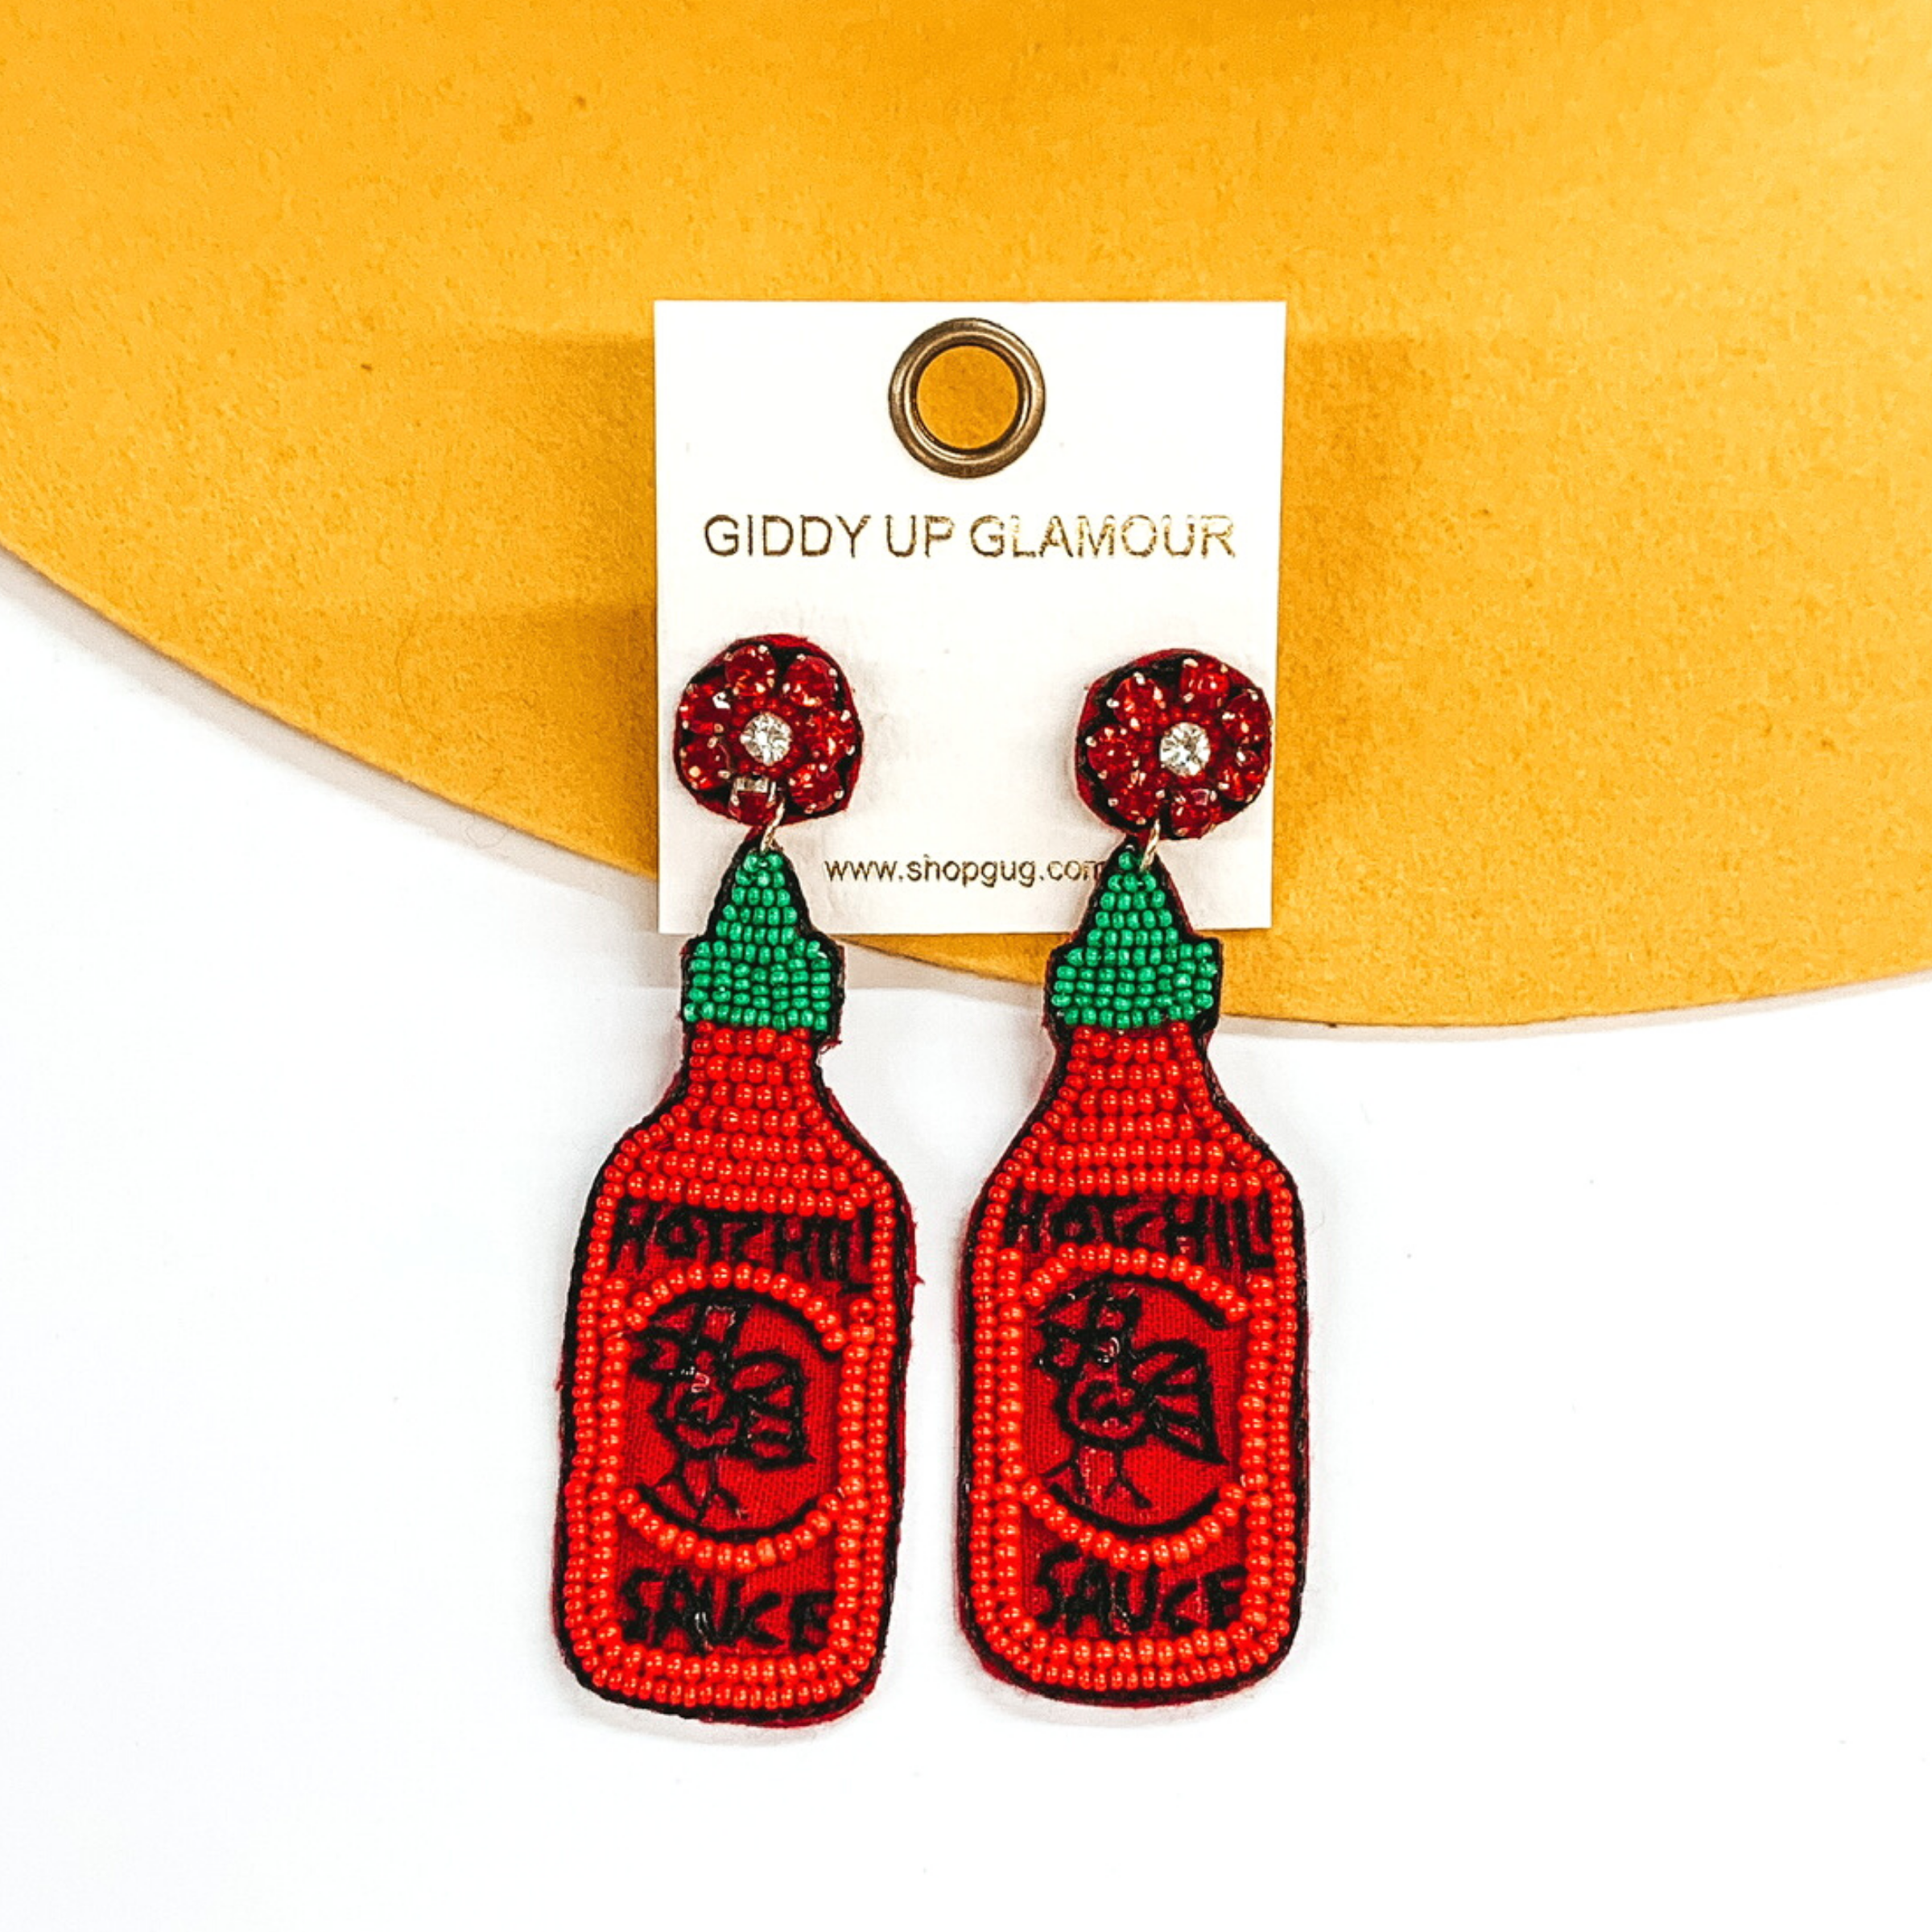 Red crystal beaded circle studs with hanging beaded bottle pendant. The pendant has a green beaded cap and red beaded bottle. The center of the bottle has a black stitched design. These earrings are pictured on a white and yellow background. 